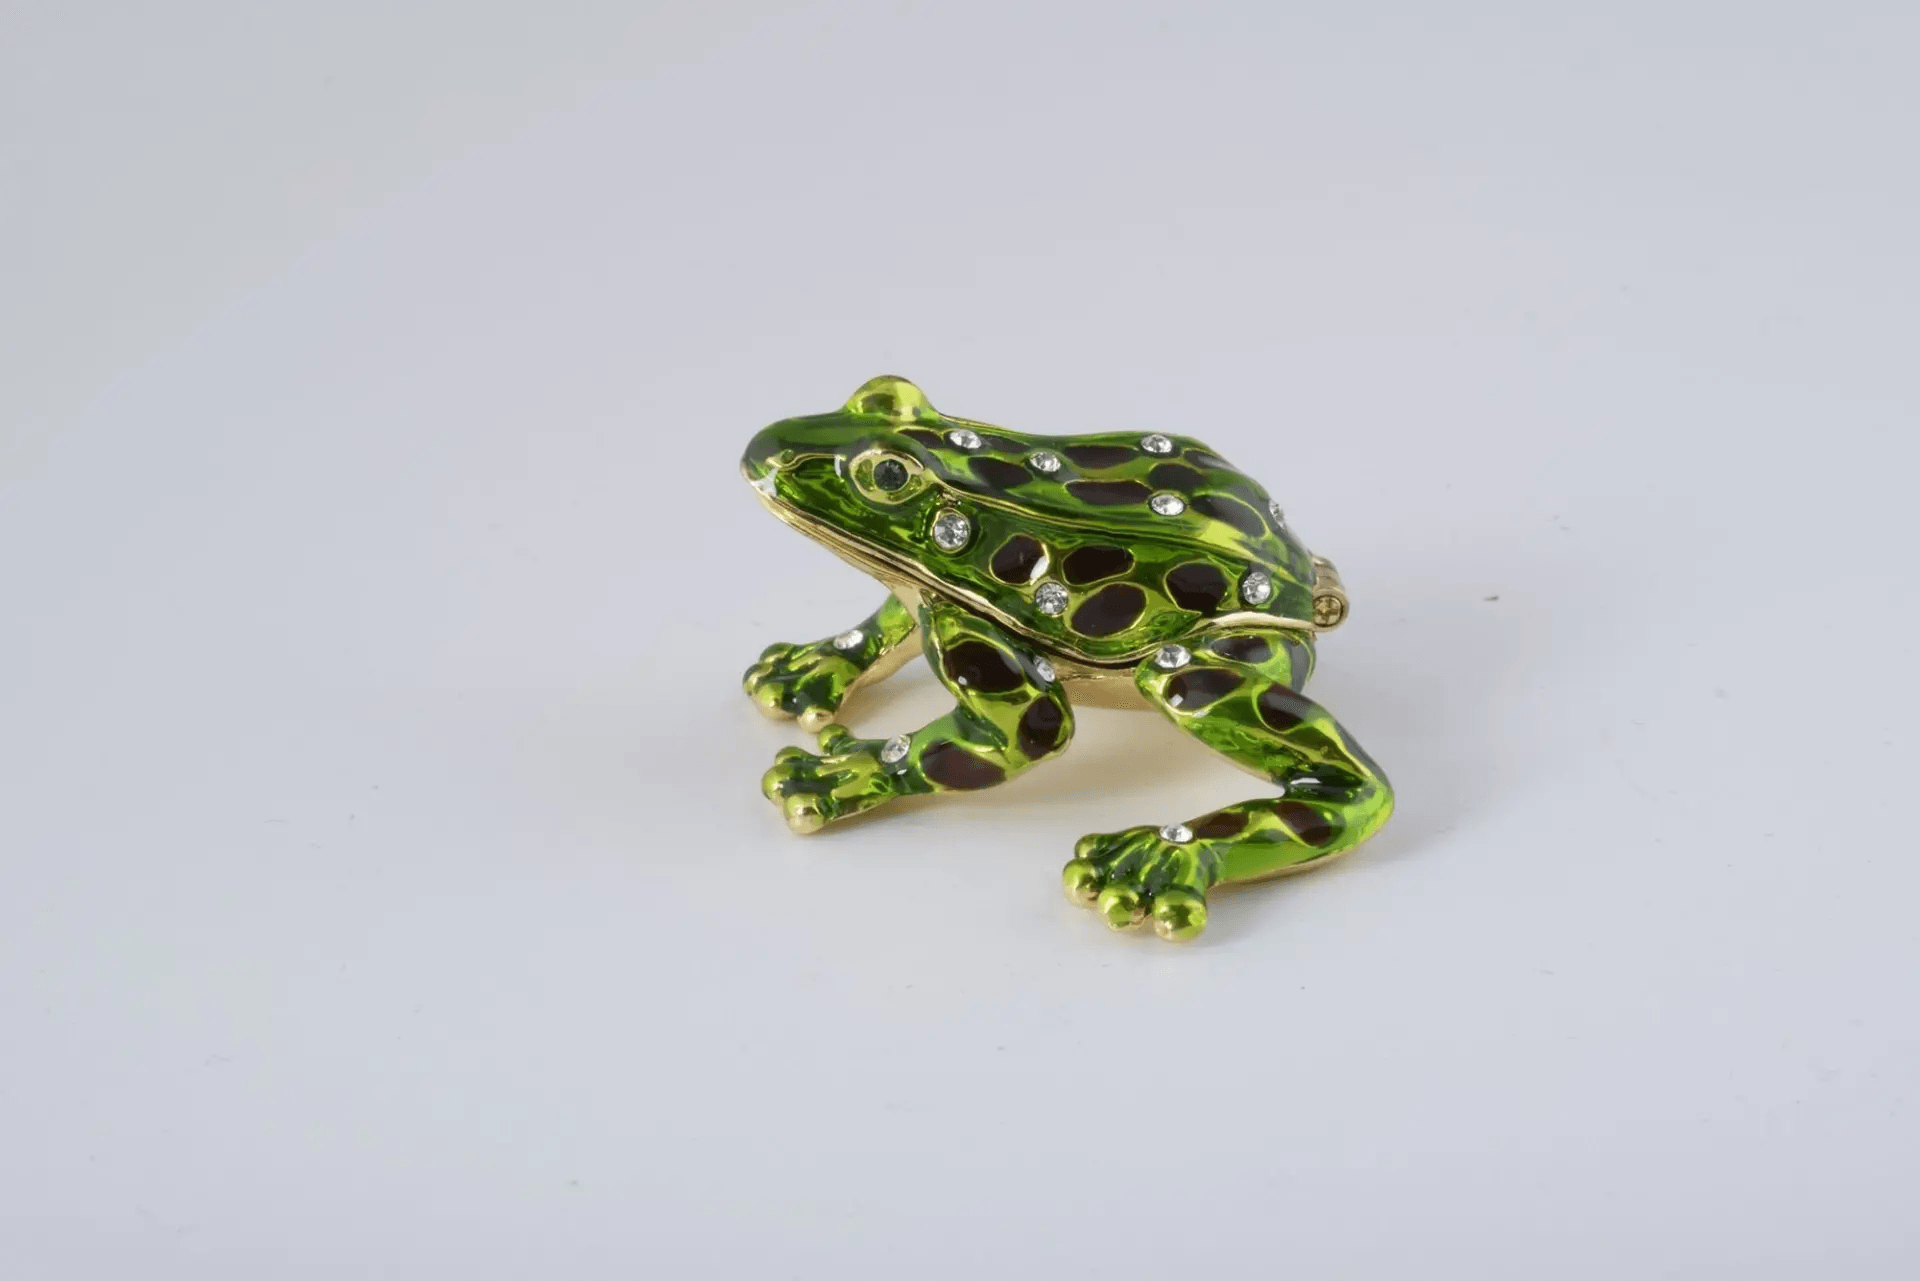 Green Black Spotted Frog  